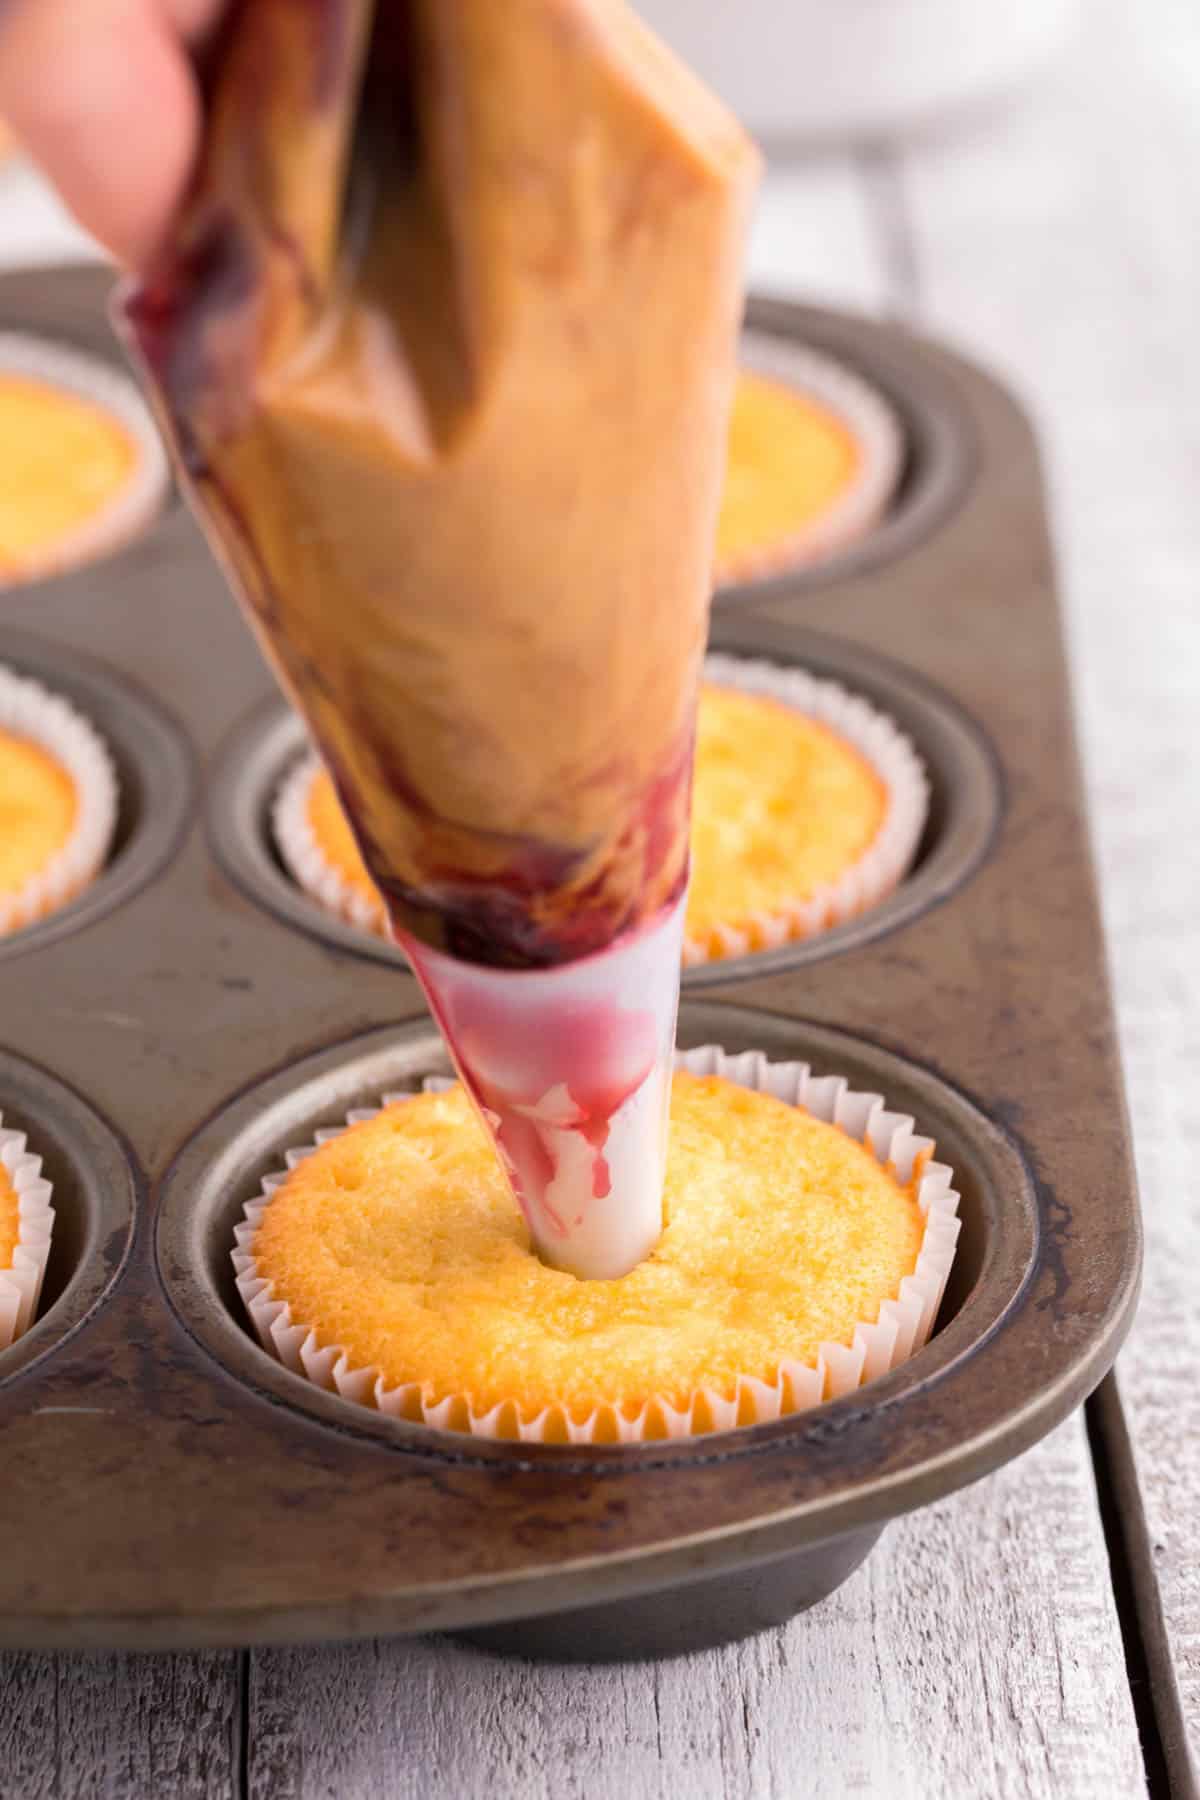 a piping bag filled with peanut butter and jelly inserted into the top of a vanilla cupcake